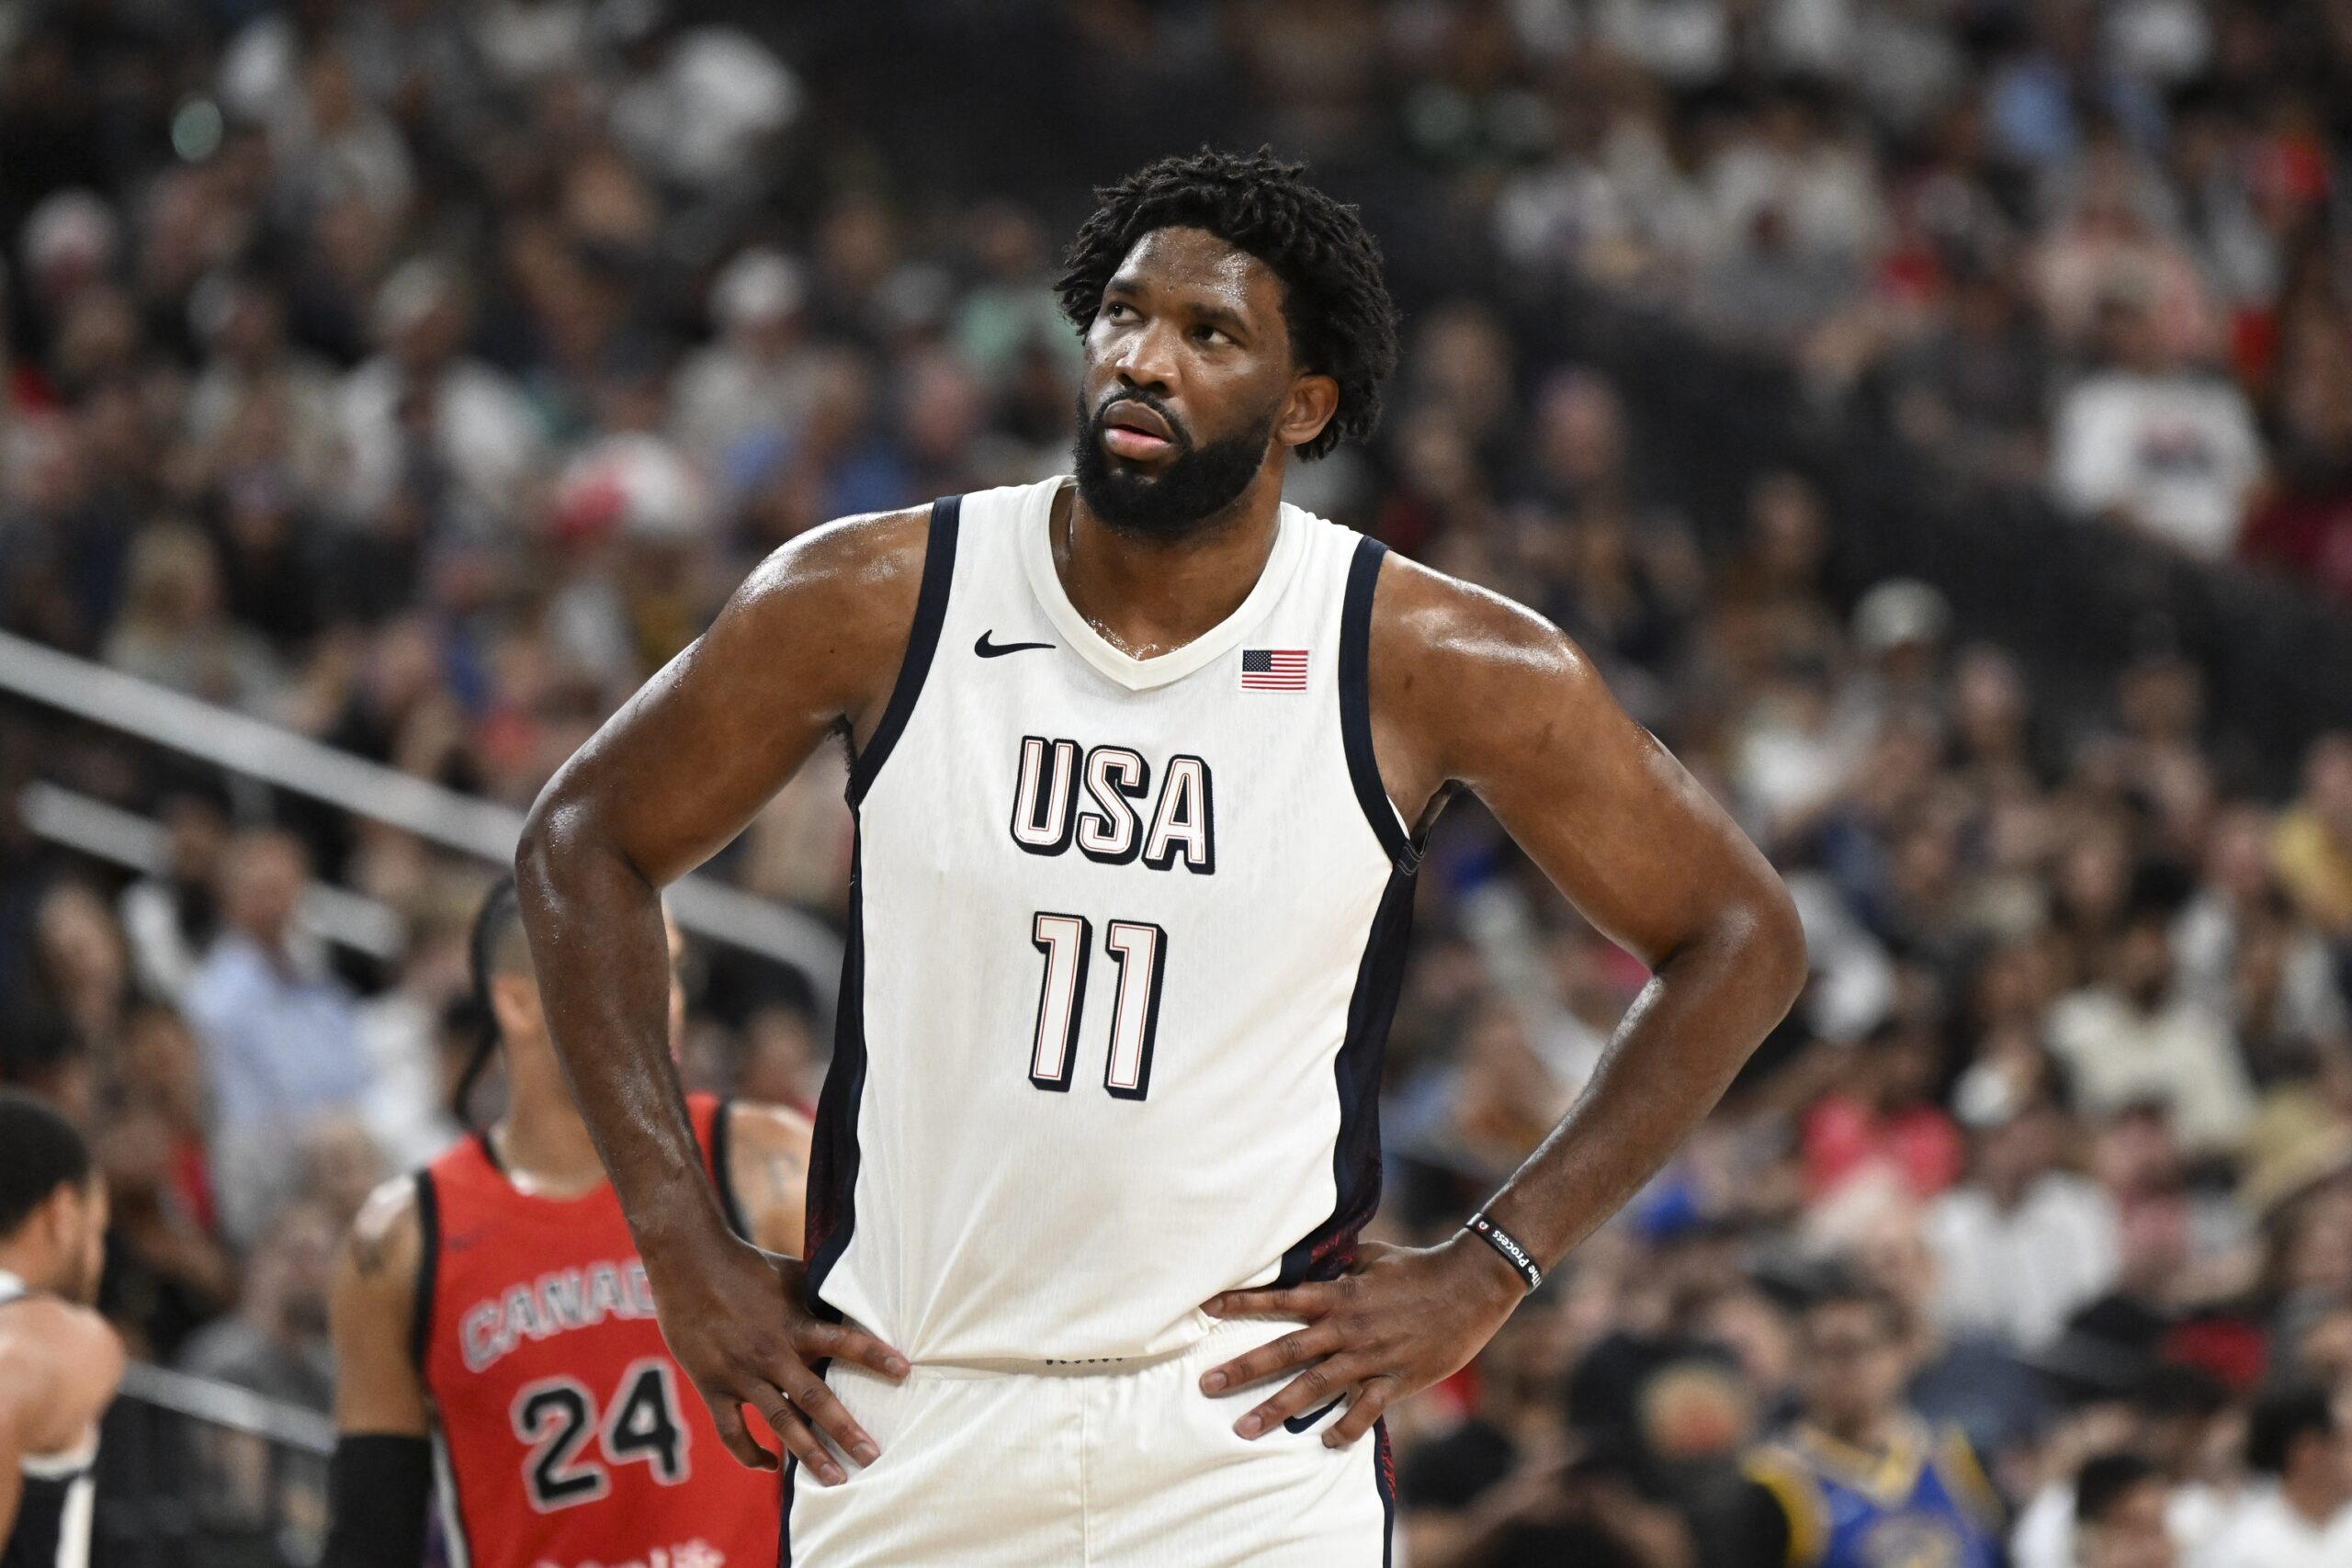 Many are wondering if Joel Embiid should play in the Olympics due to his injury history.